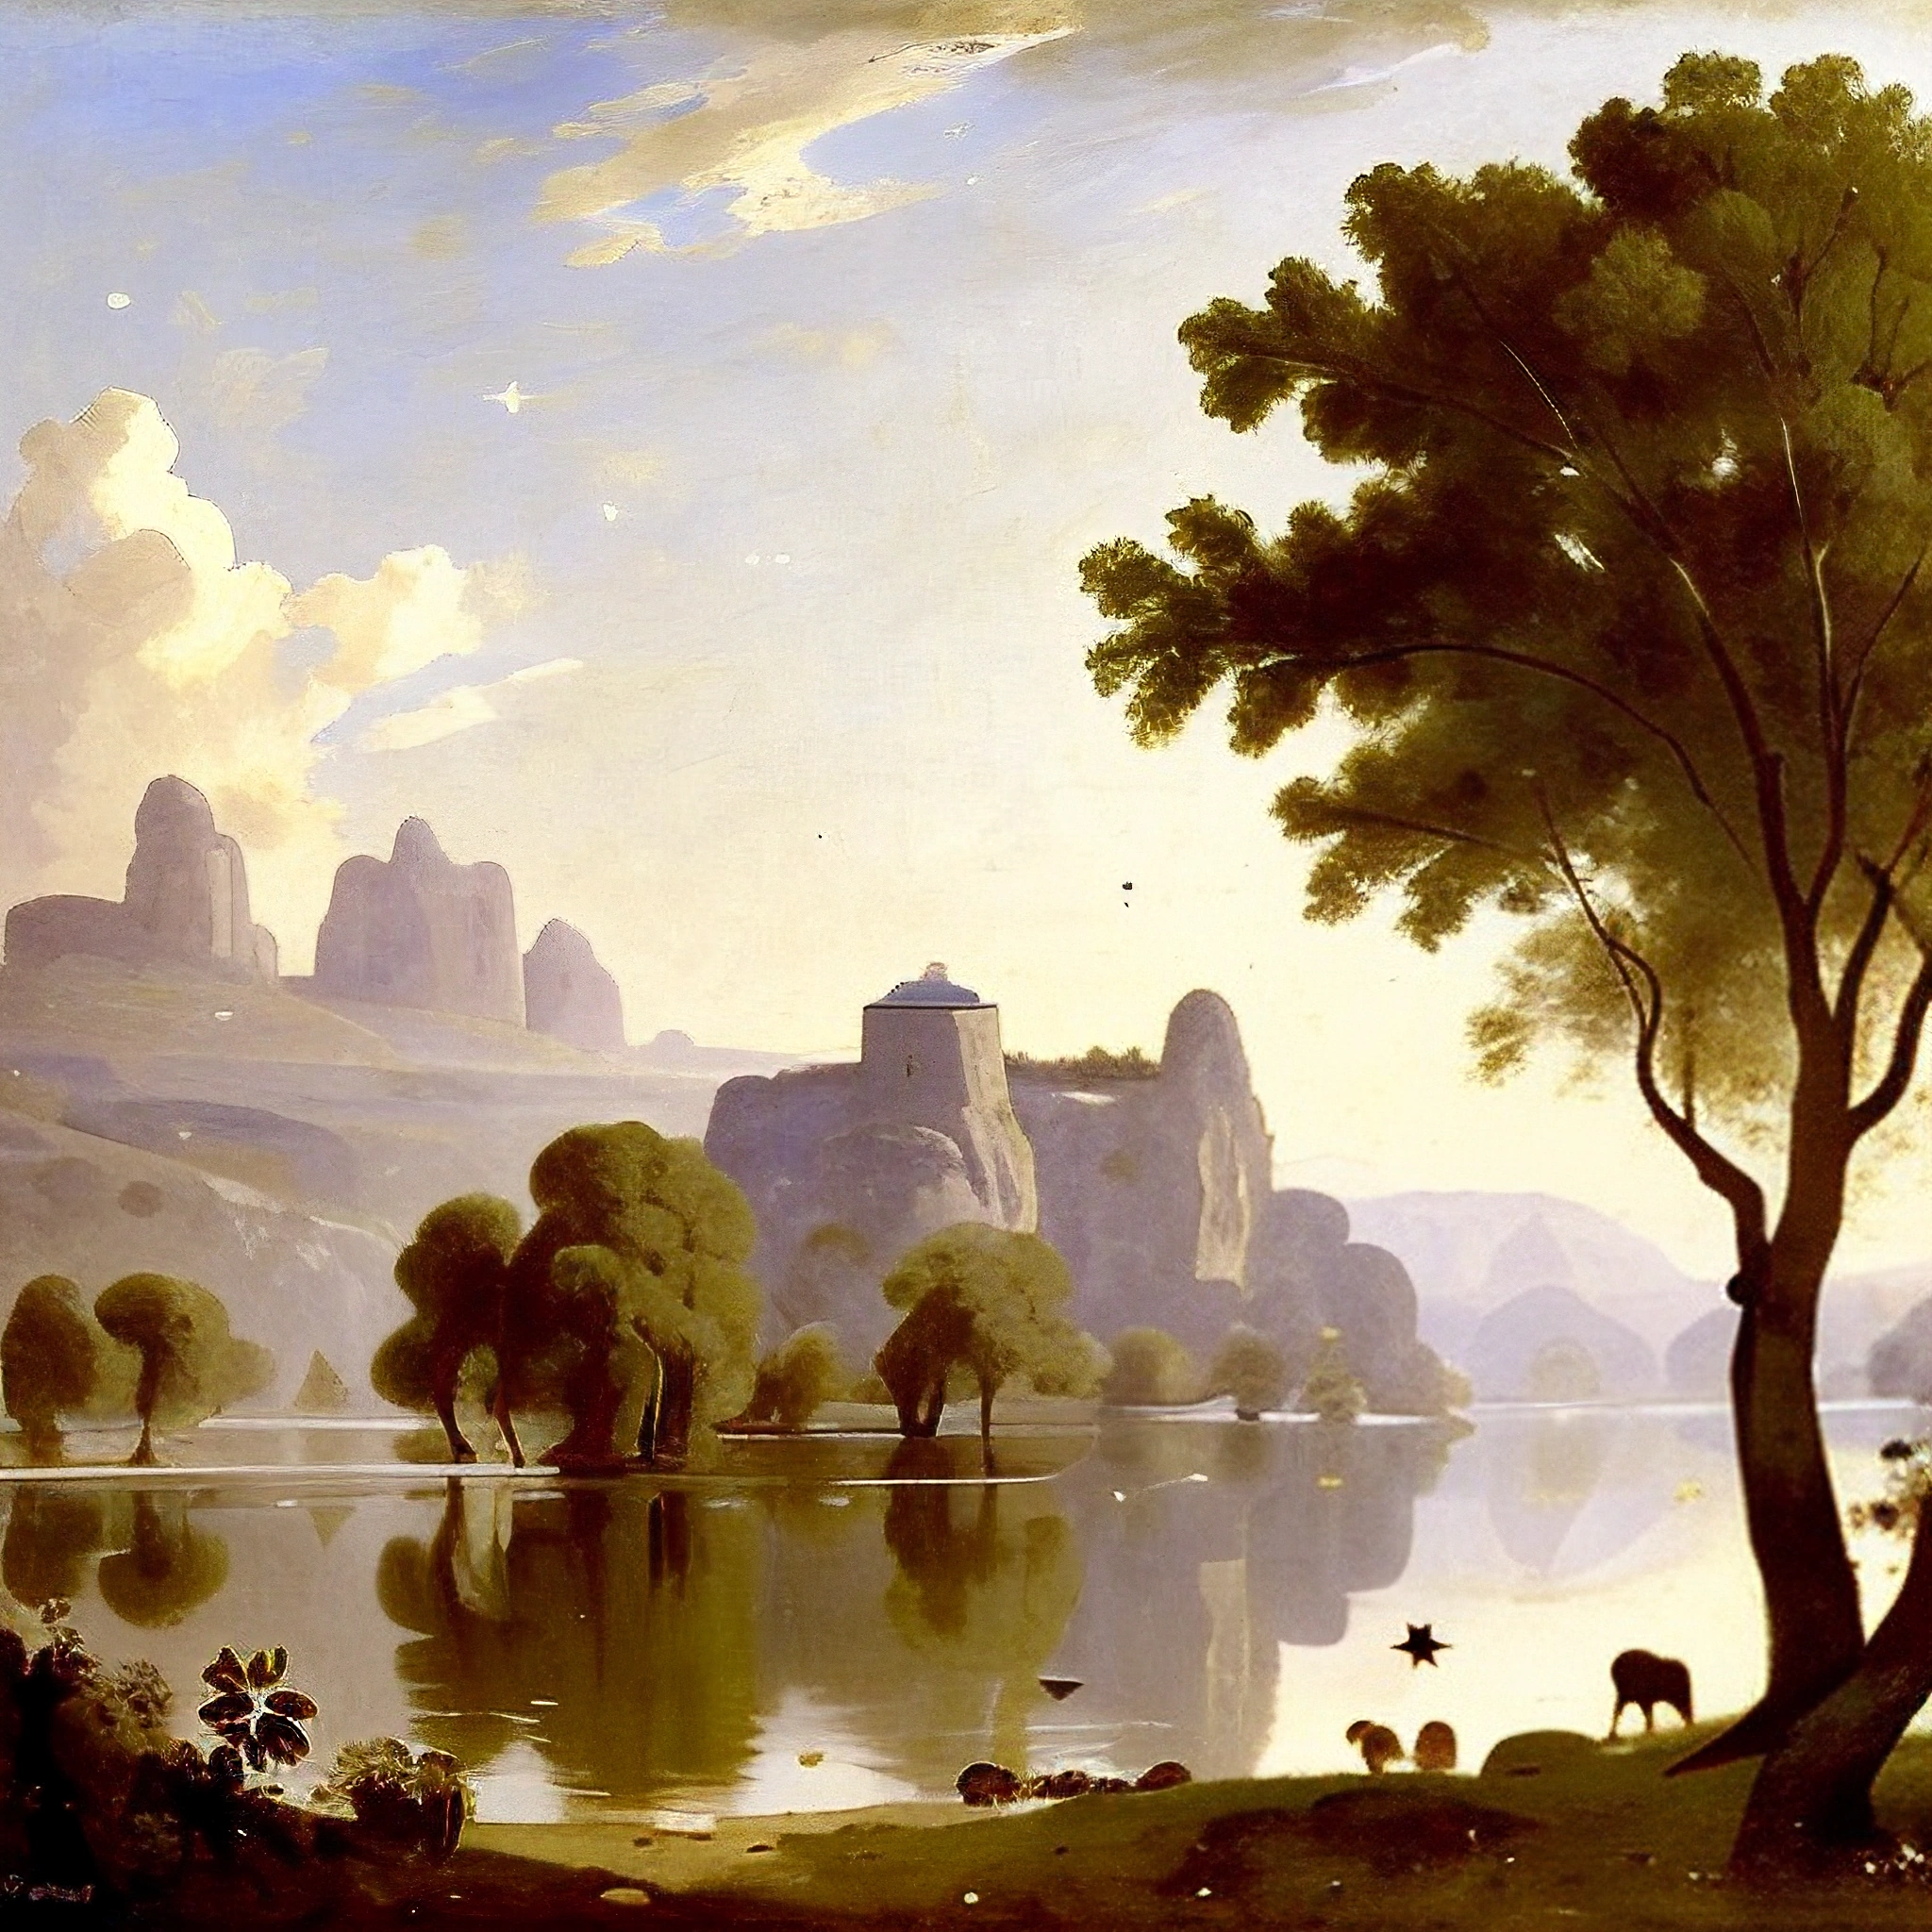 painting of a painting of a mountain landscape with a lake and a few animals